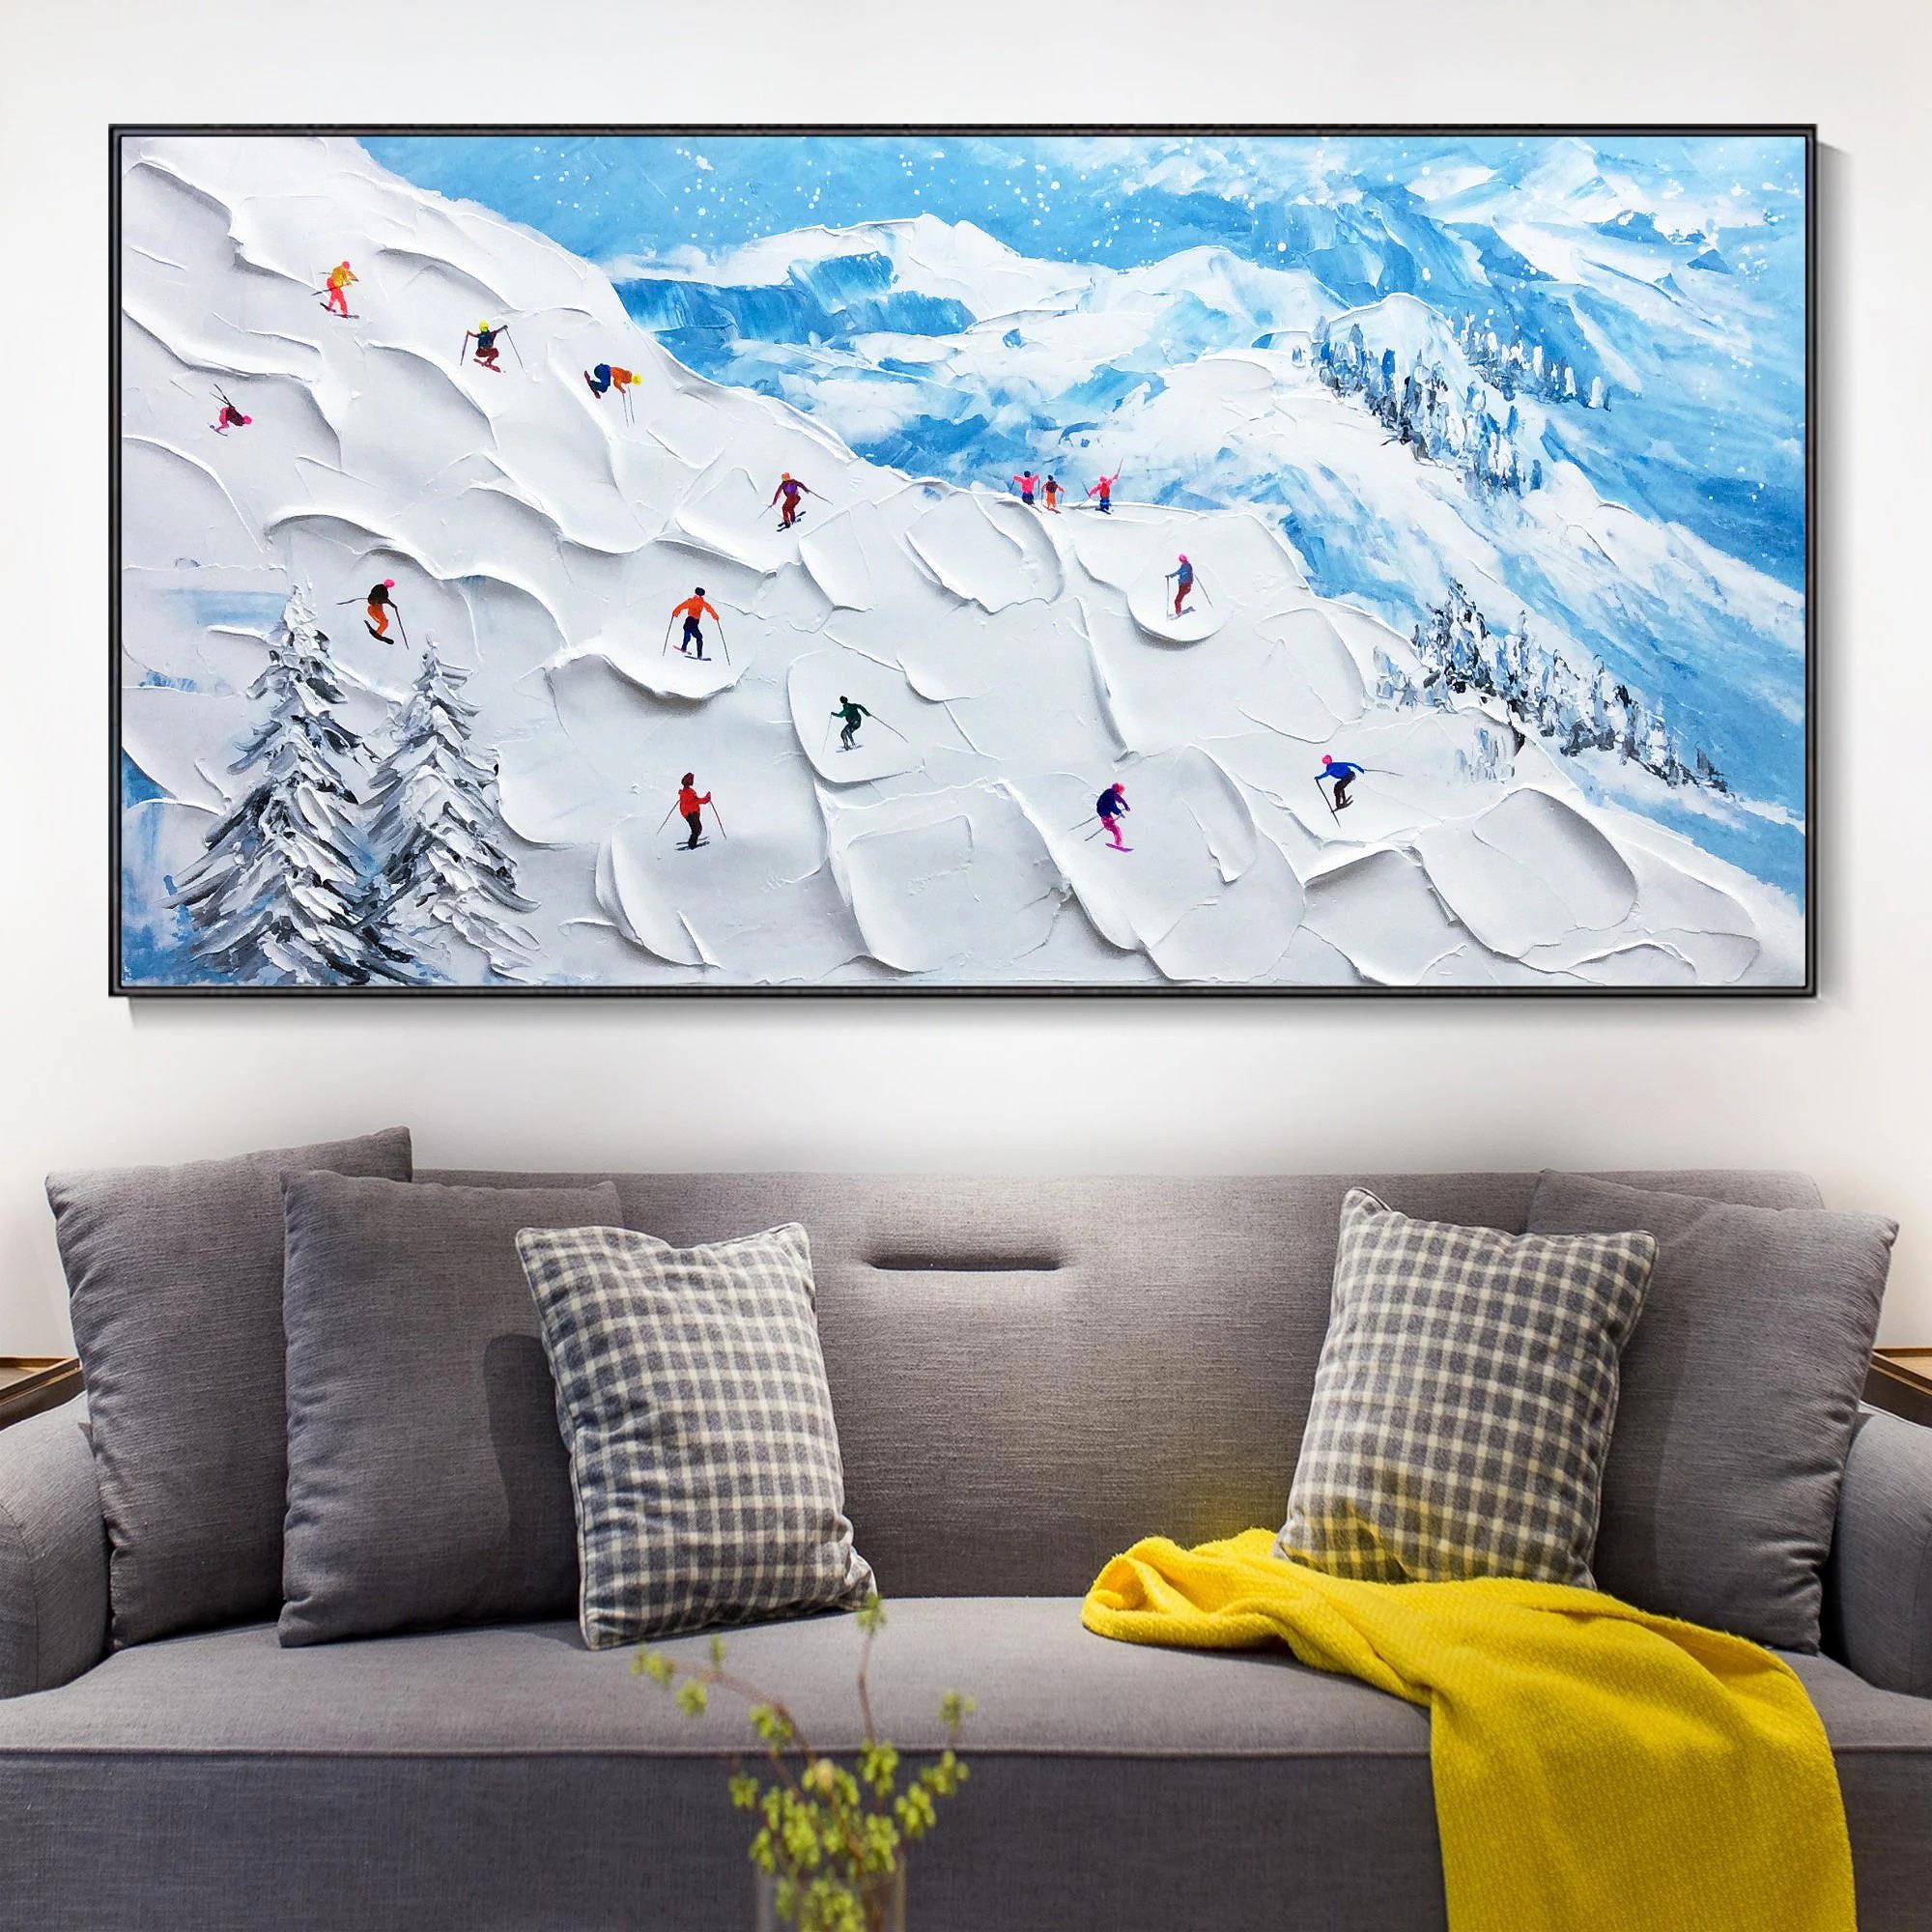 Skier on Snowy Mountain Wall Art Sport White Snow Skiing Room Decor by Knife 21 Oil Paintings